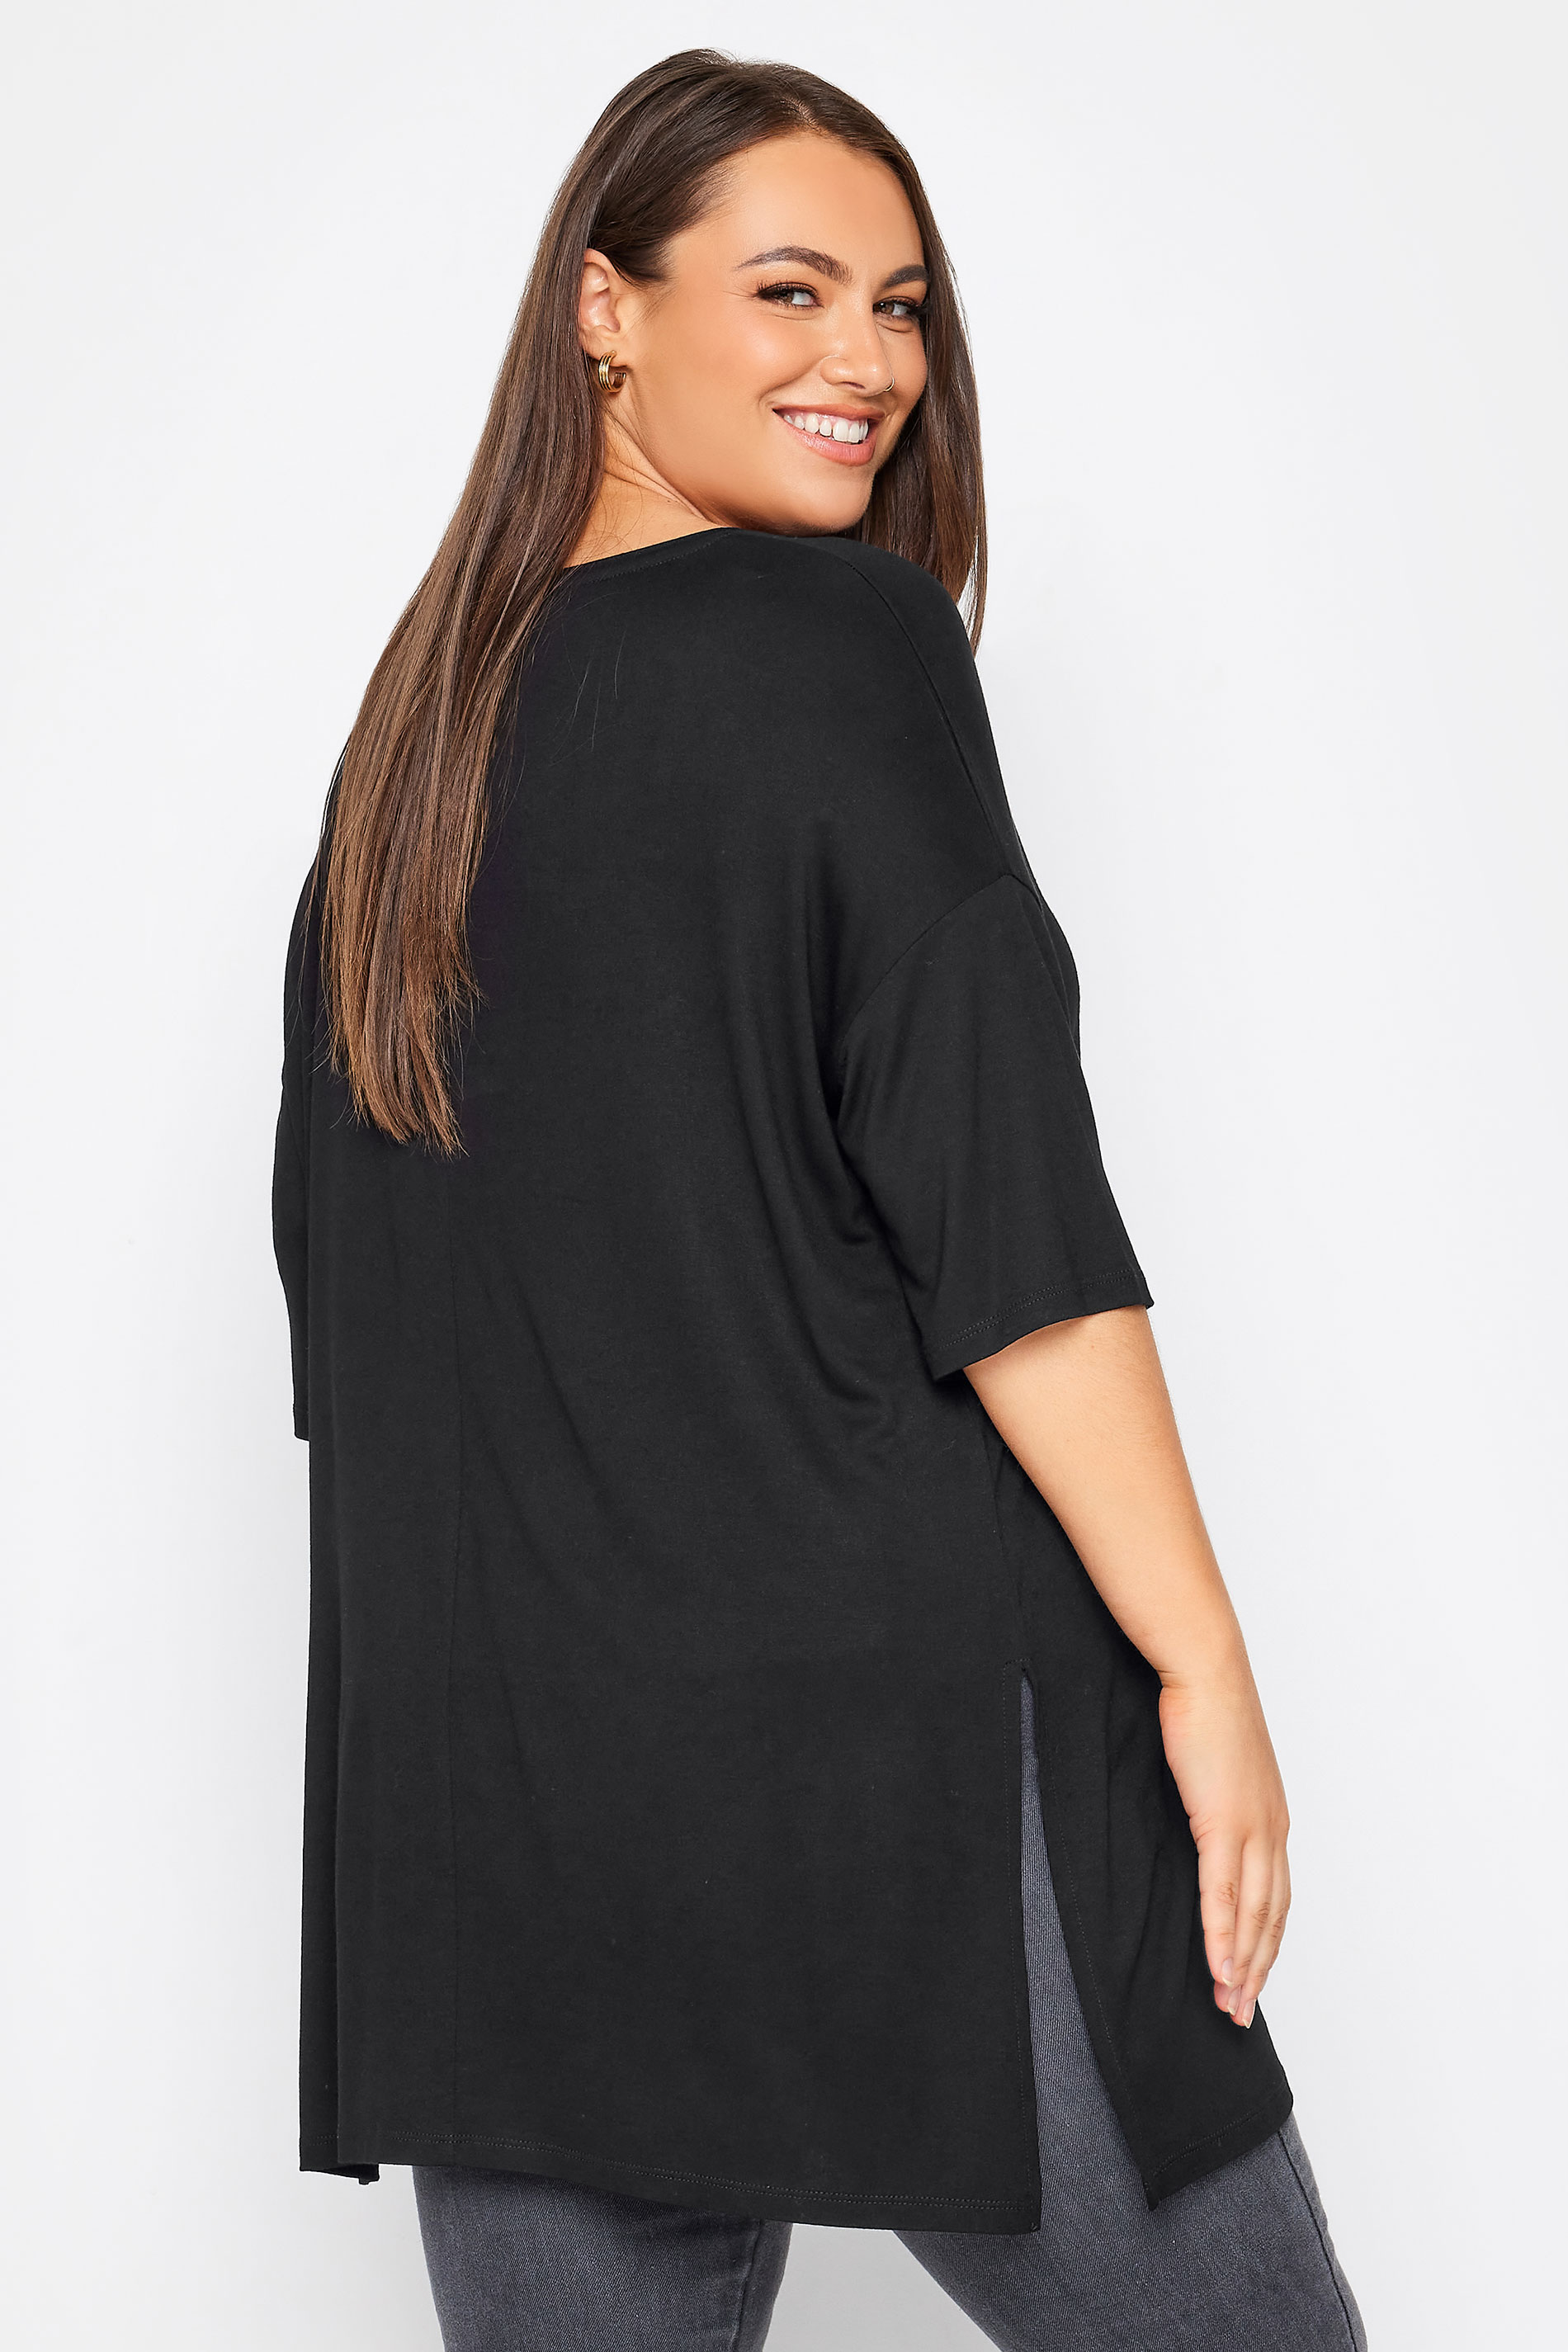 YOURS Curve Plus Size Black 'Literally Dead' Slogan T-Shirt | Yours Clothing  3